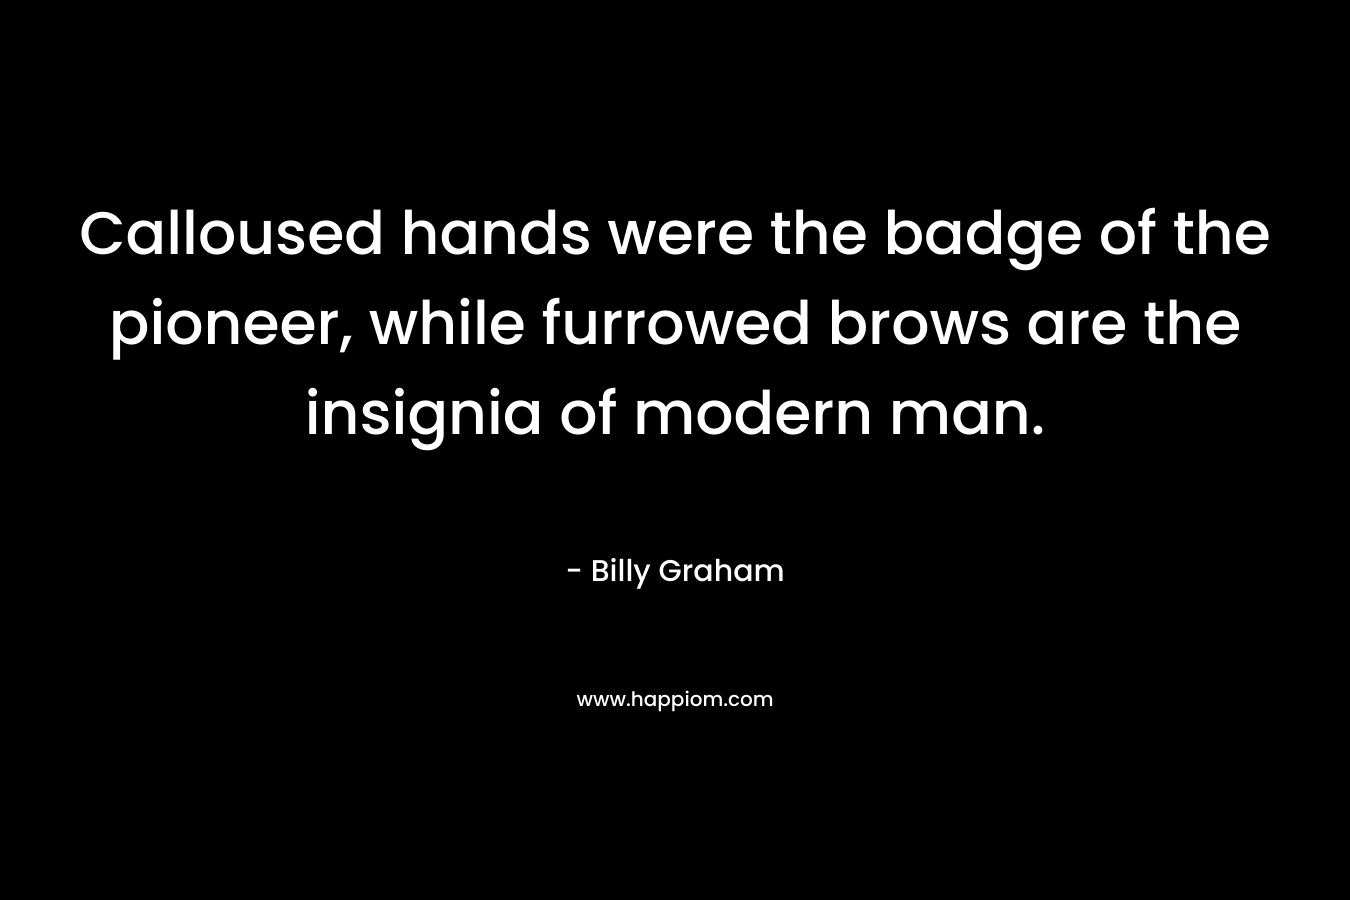 Calloused hands were the badge of the pioneer, while furrowed brows are the insignia of modern man. – Billy Graham